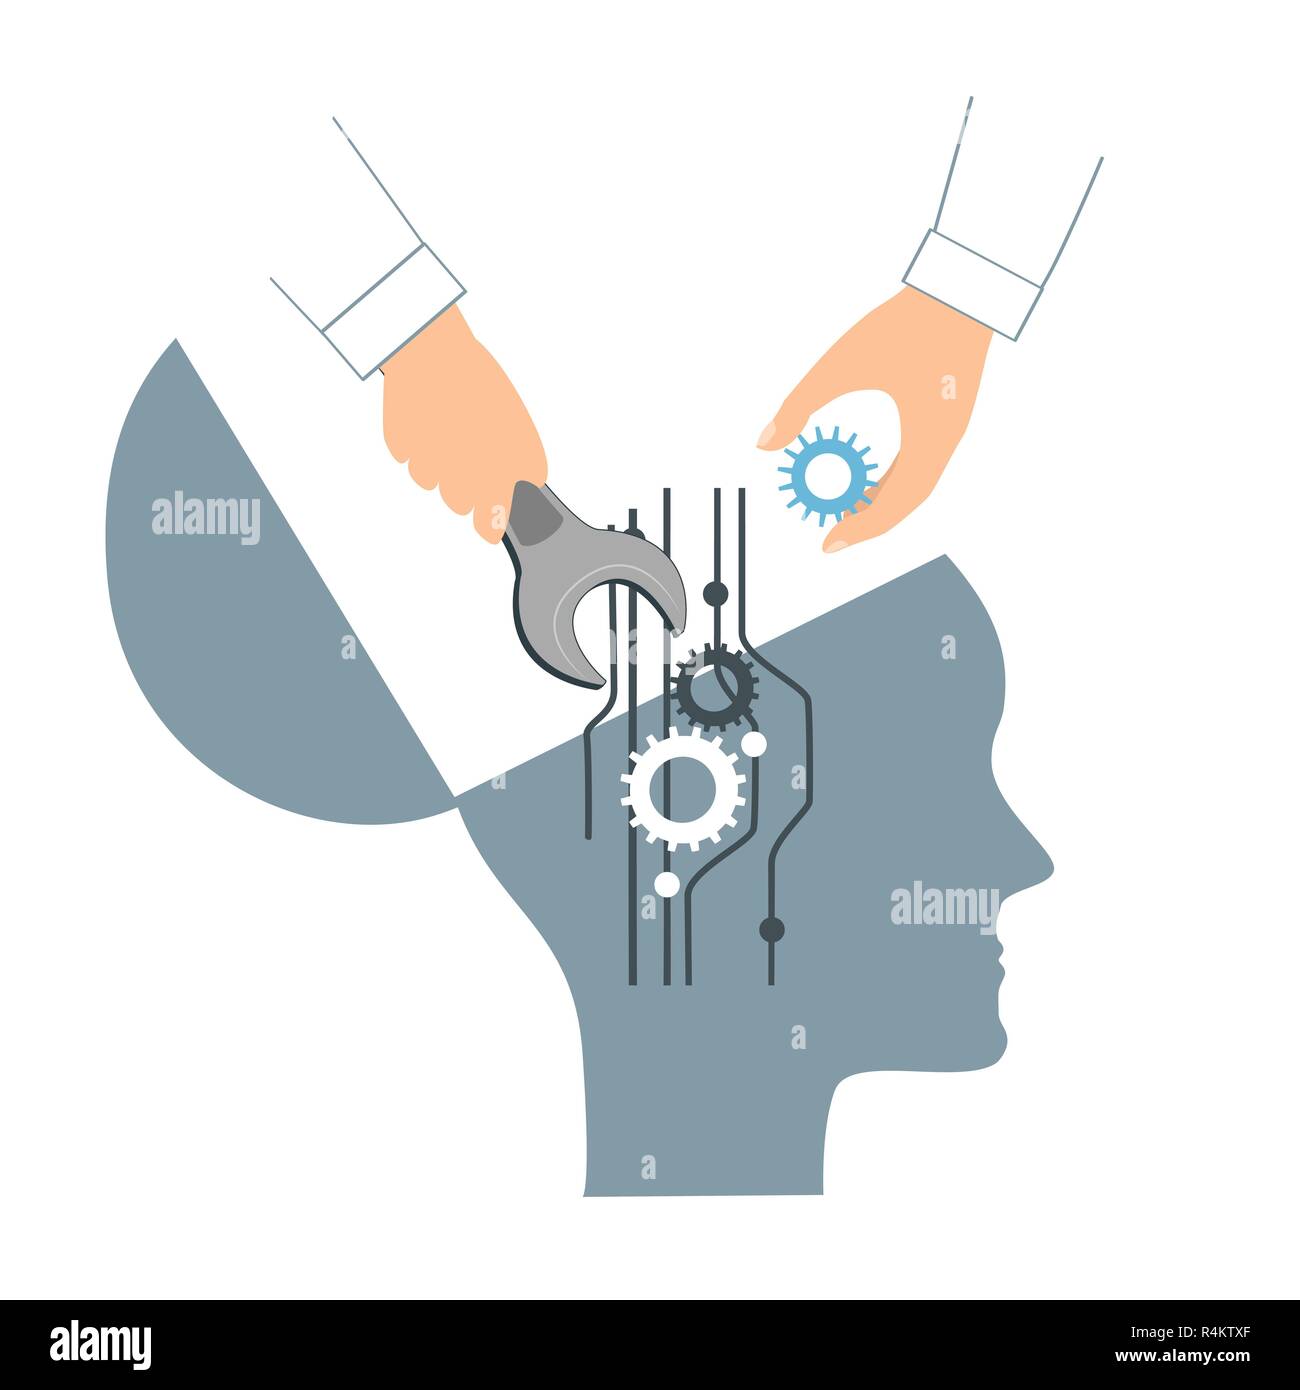 NLP or Neuro-Linguistic Programming concept. Open Human Head and a Hand with a Wrench. Manipulation, Mental health, personal development, and psychotherapy icon Stock Vector